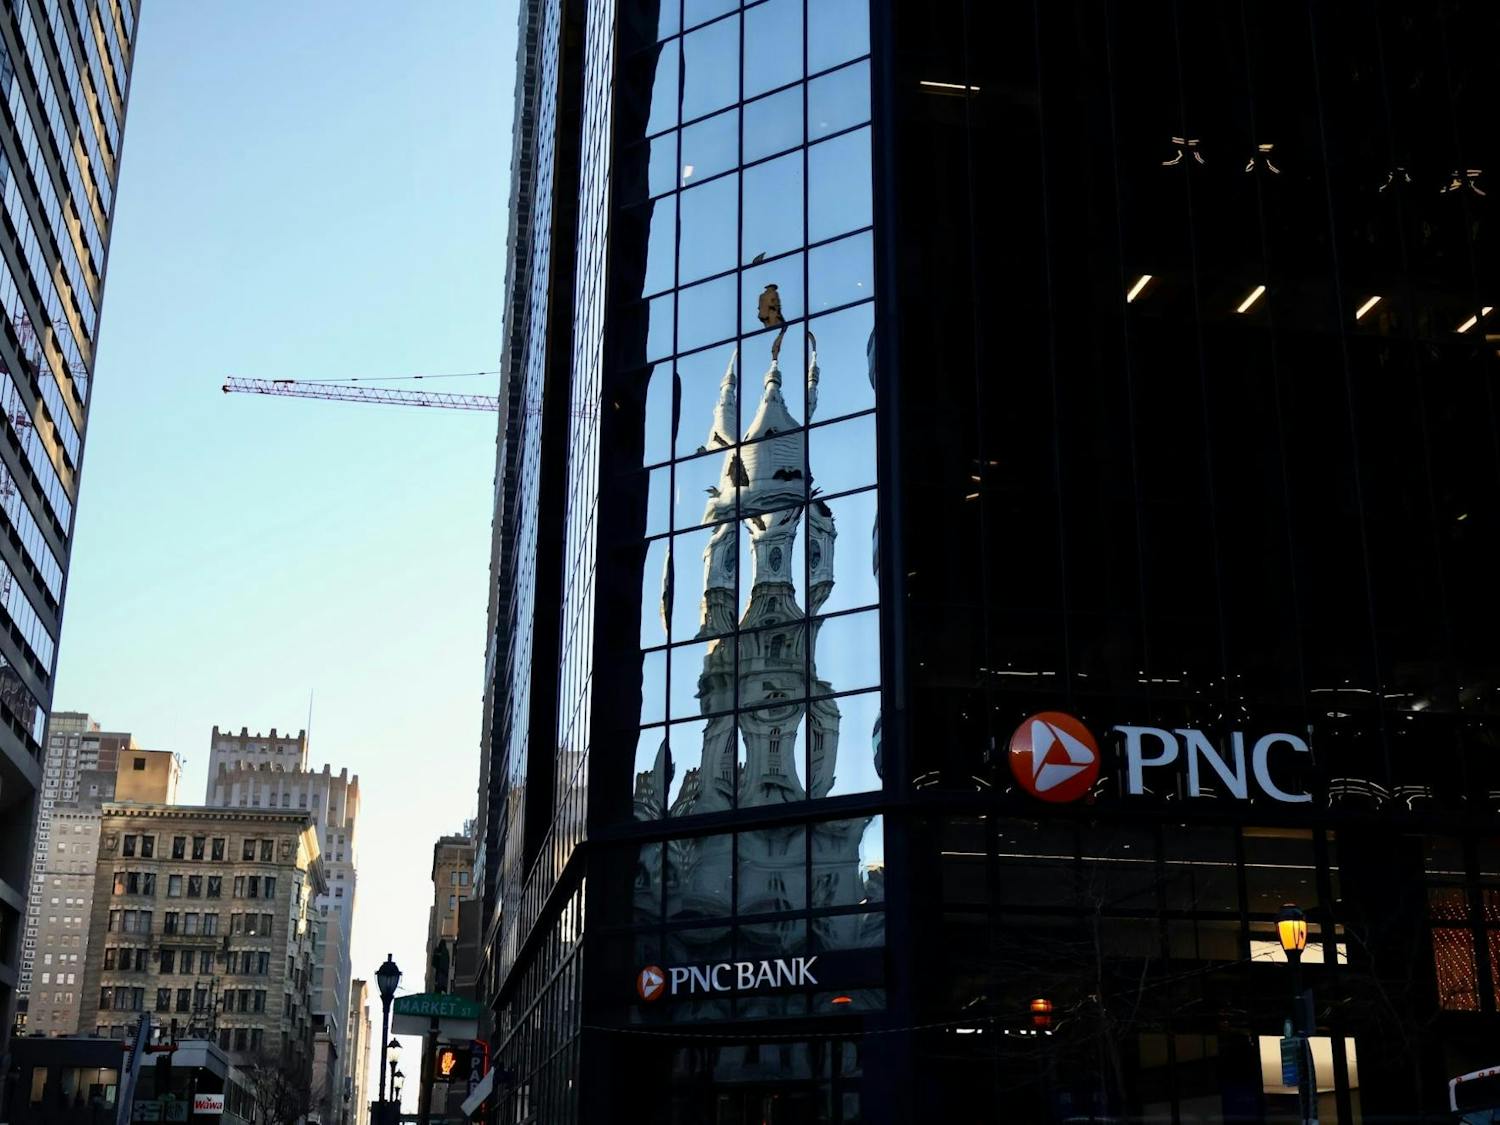 City Hall reflects on PNC Bank building